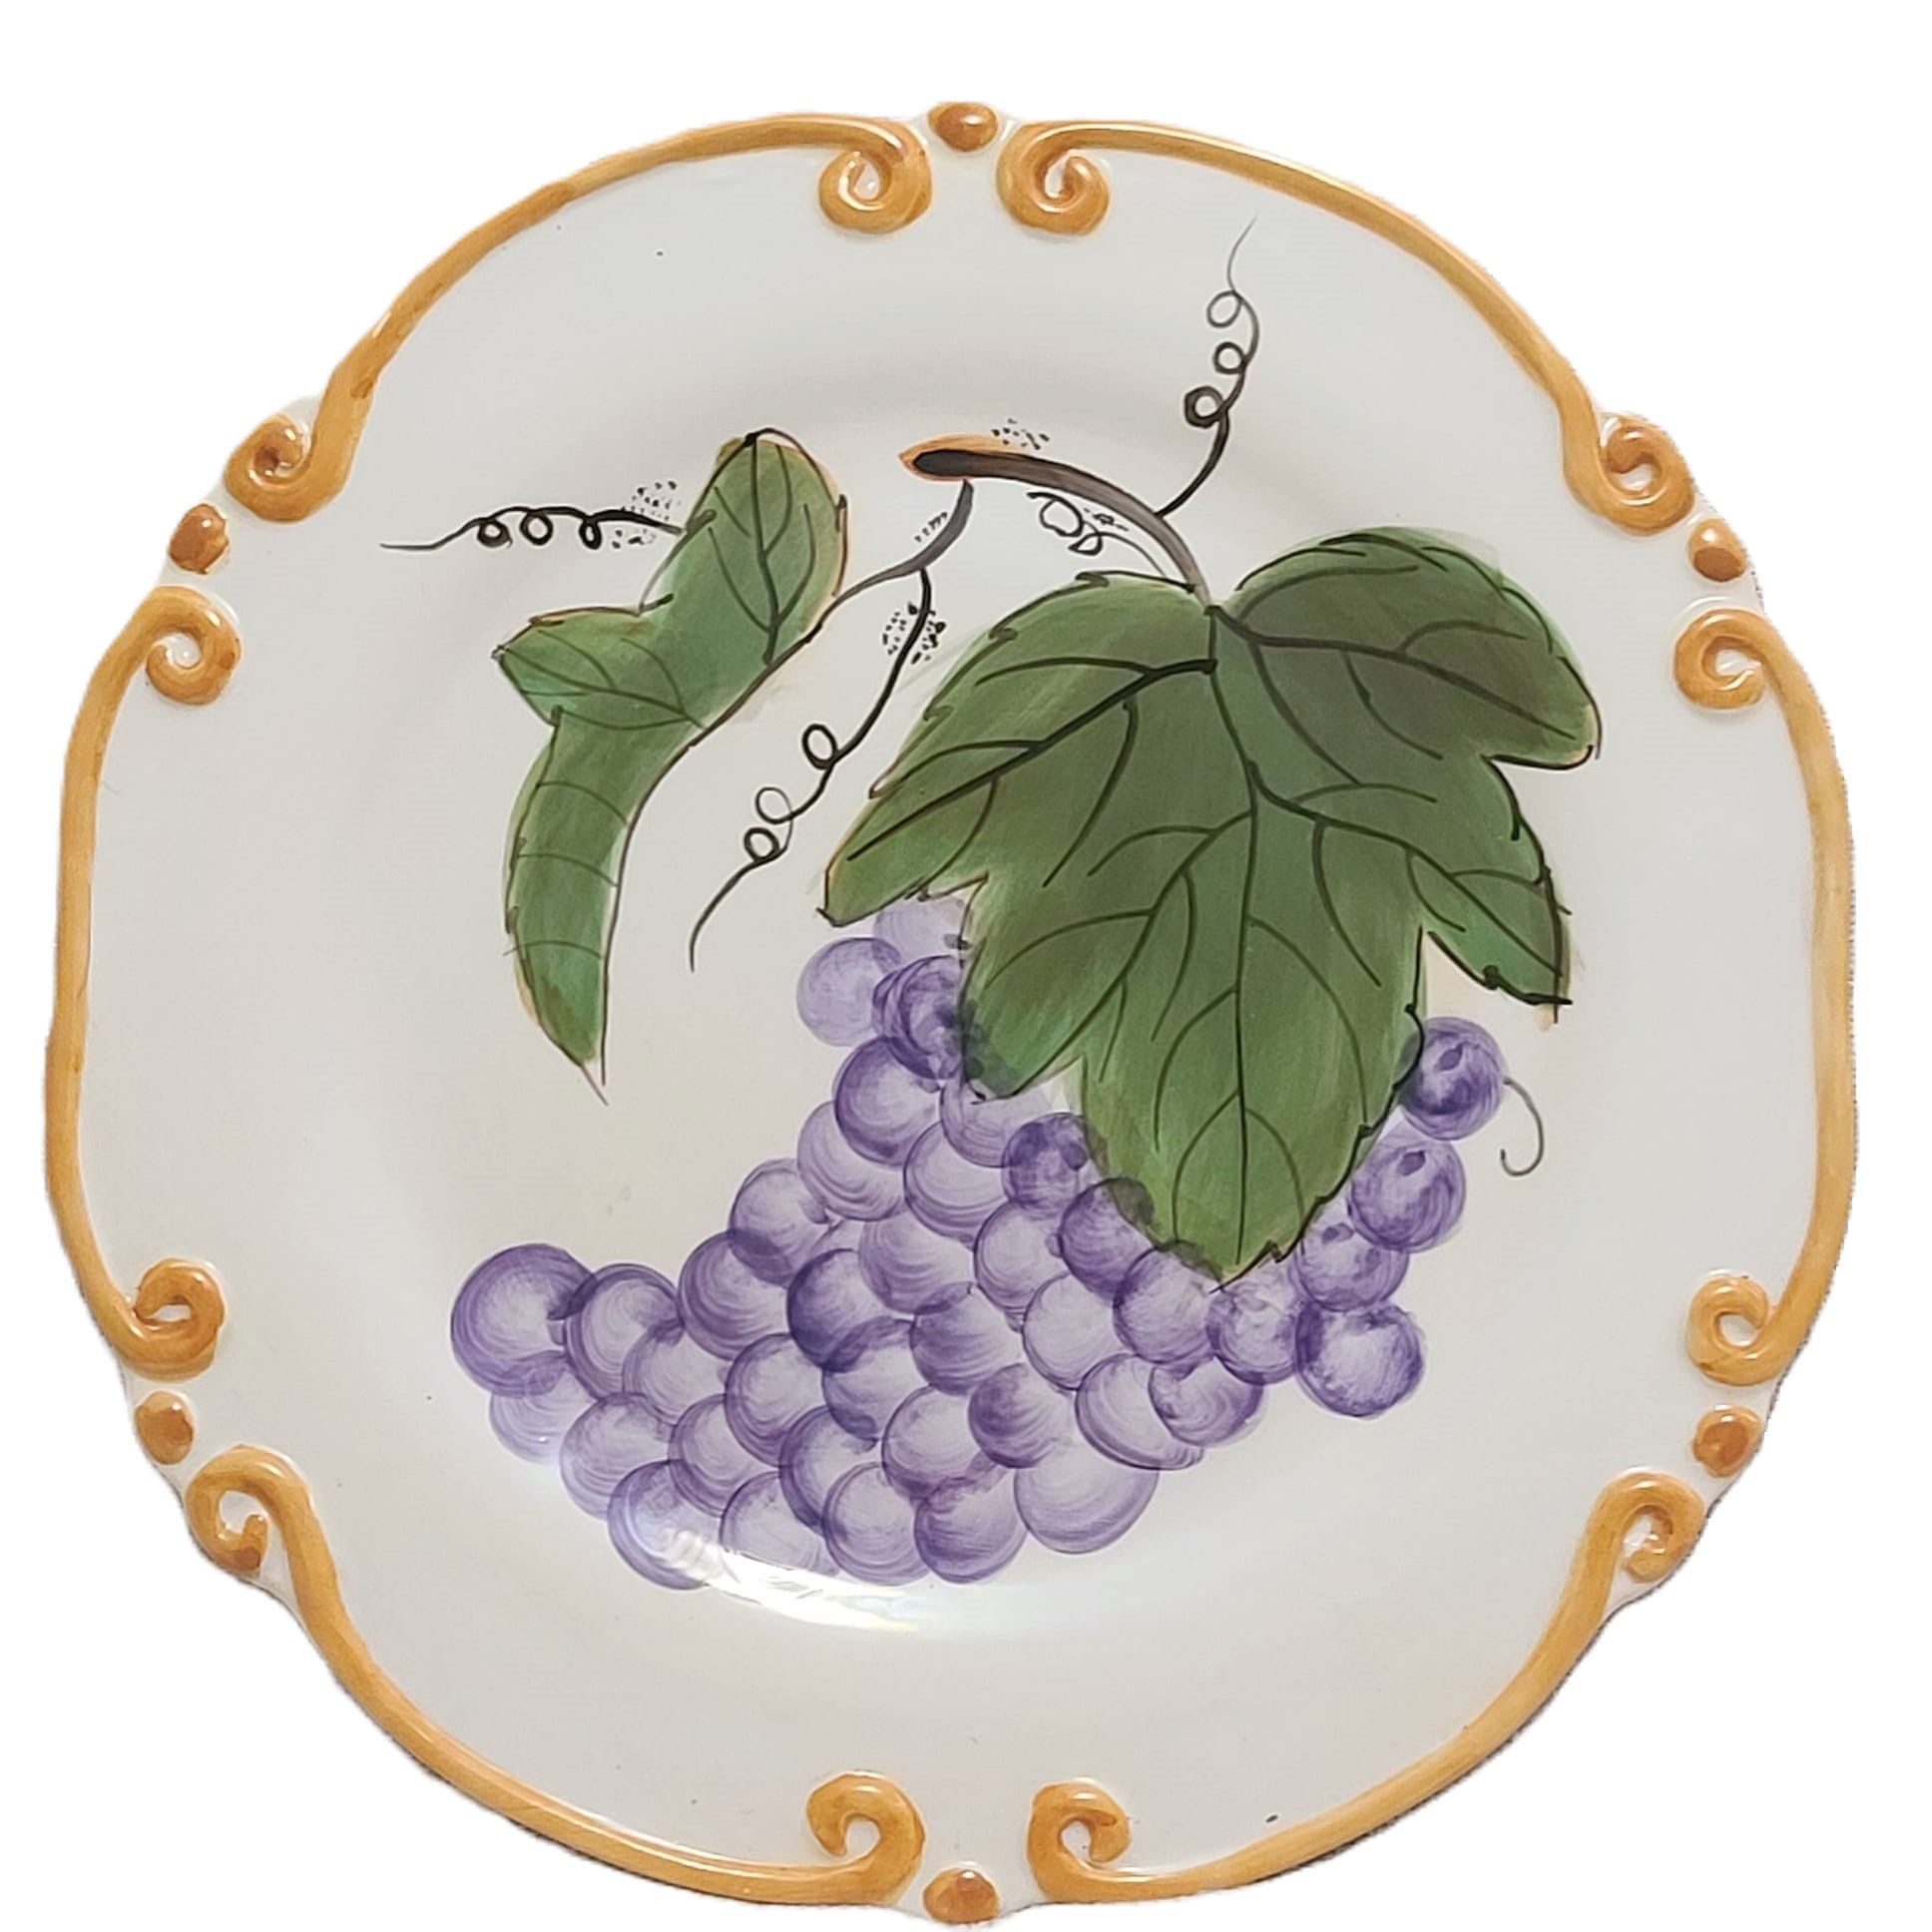 Ambiance Collections Set of 4 Cake Snack Plates - Grape Vines